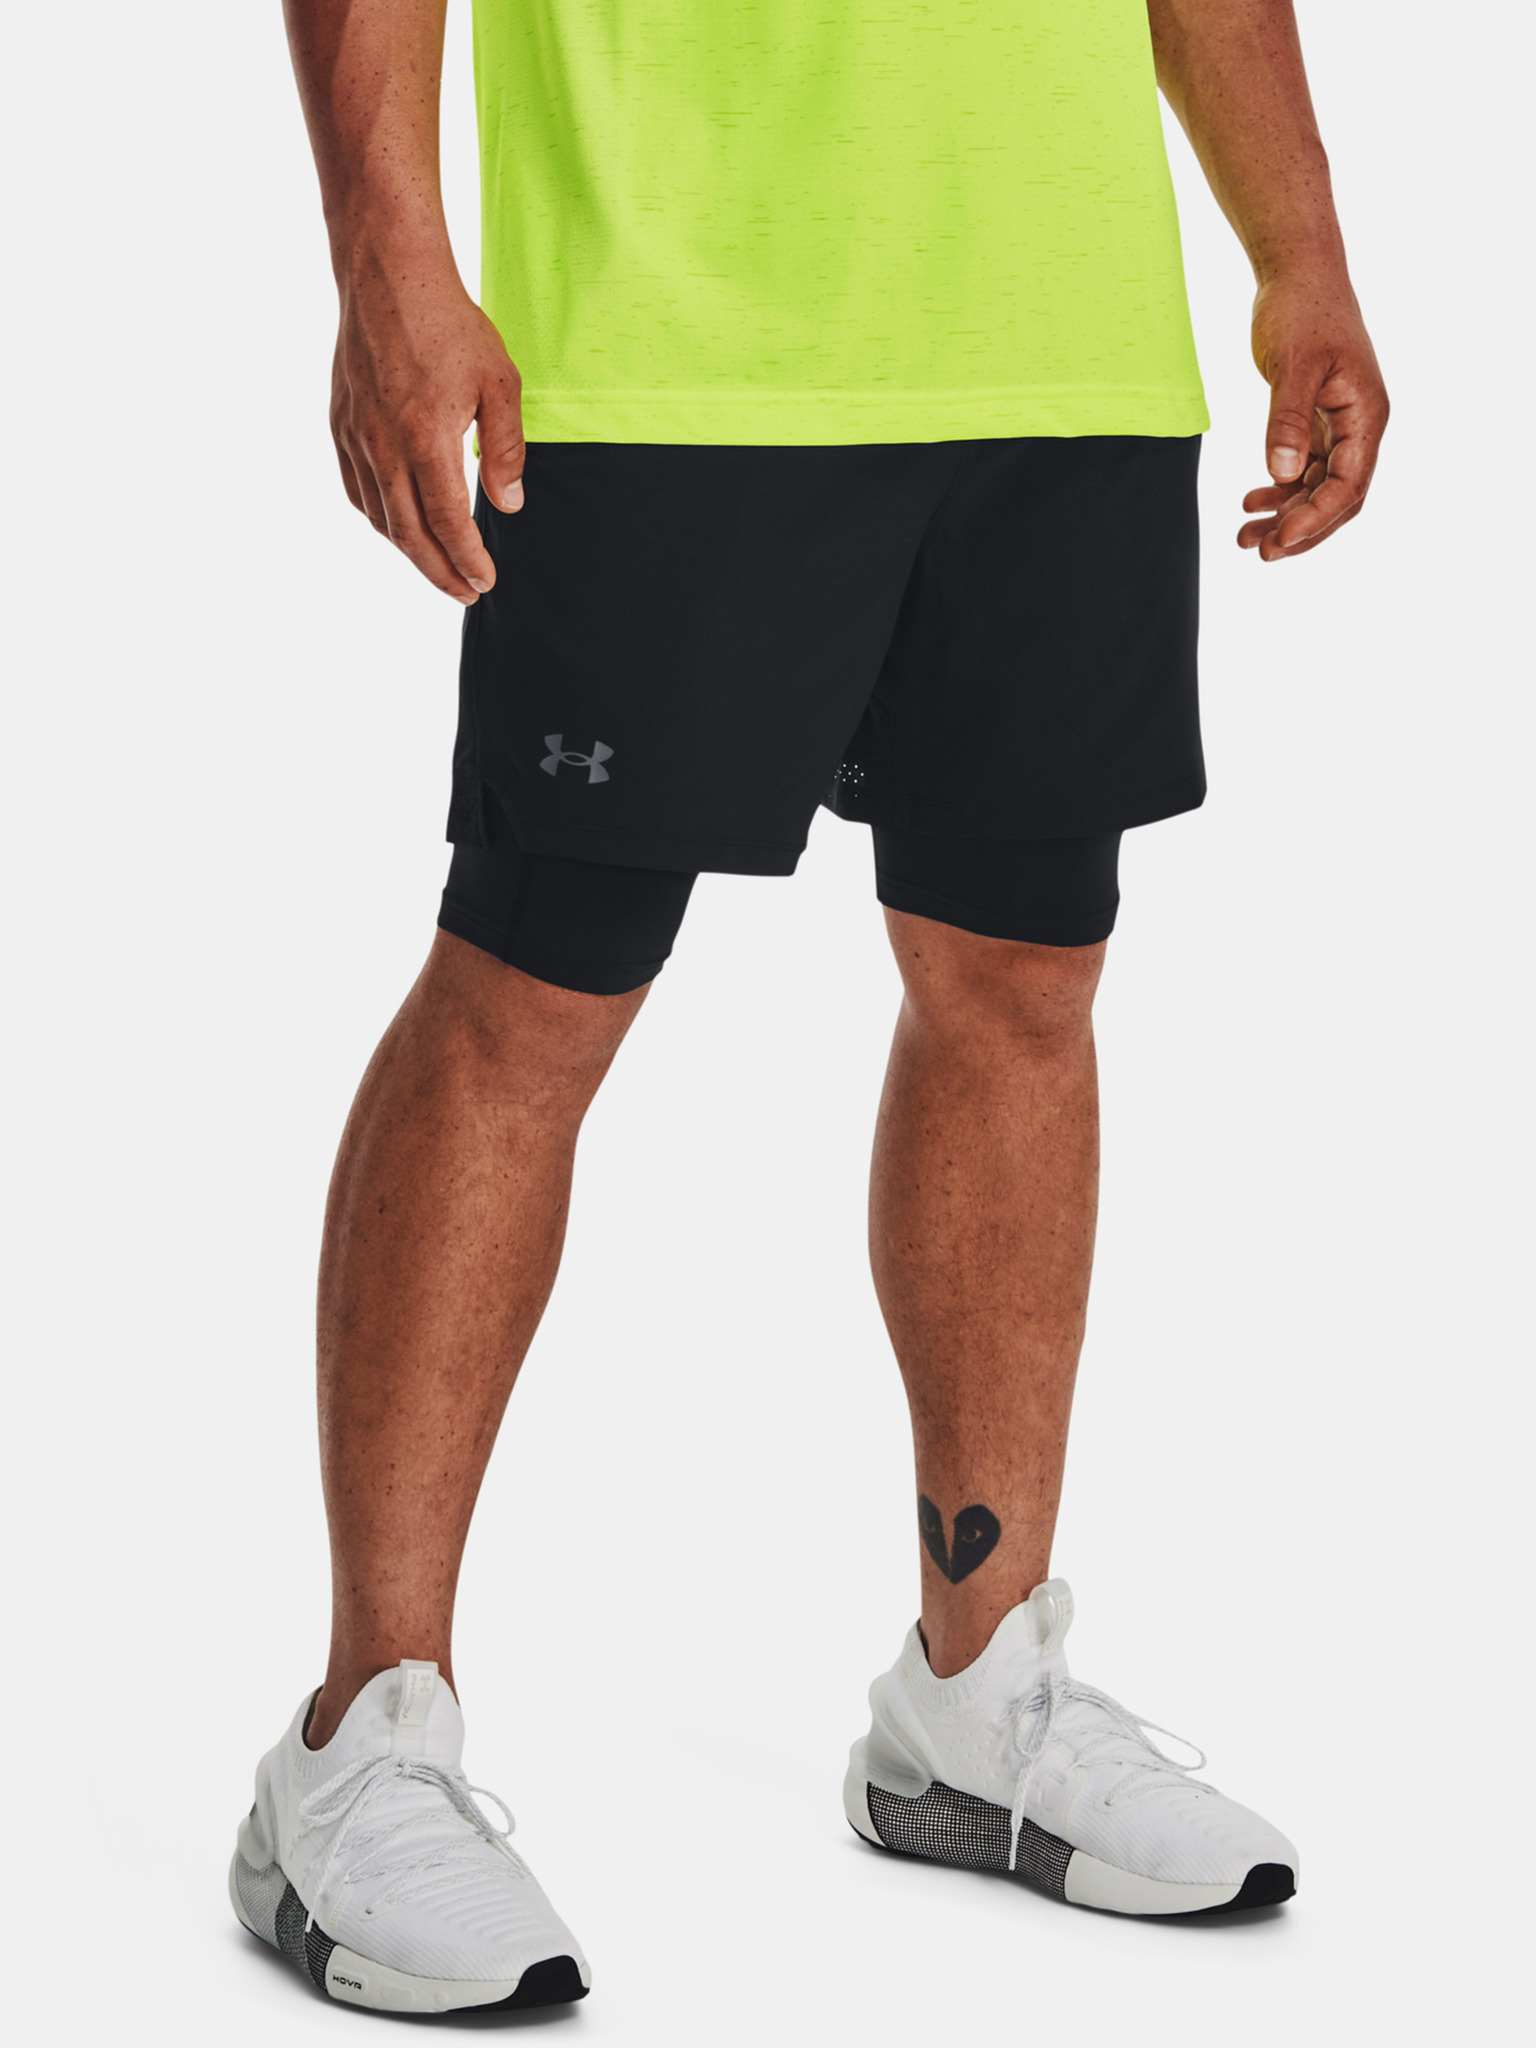 Sts-BLK Vanish 2in1 - pants Short Woven Armour Under UA